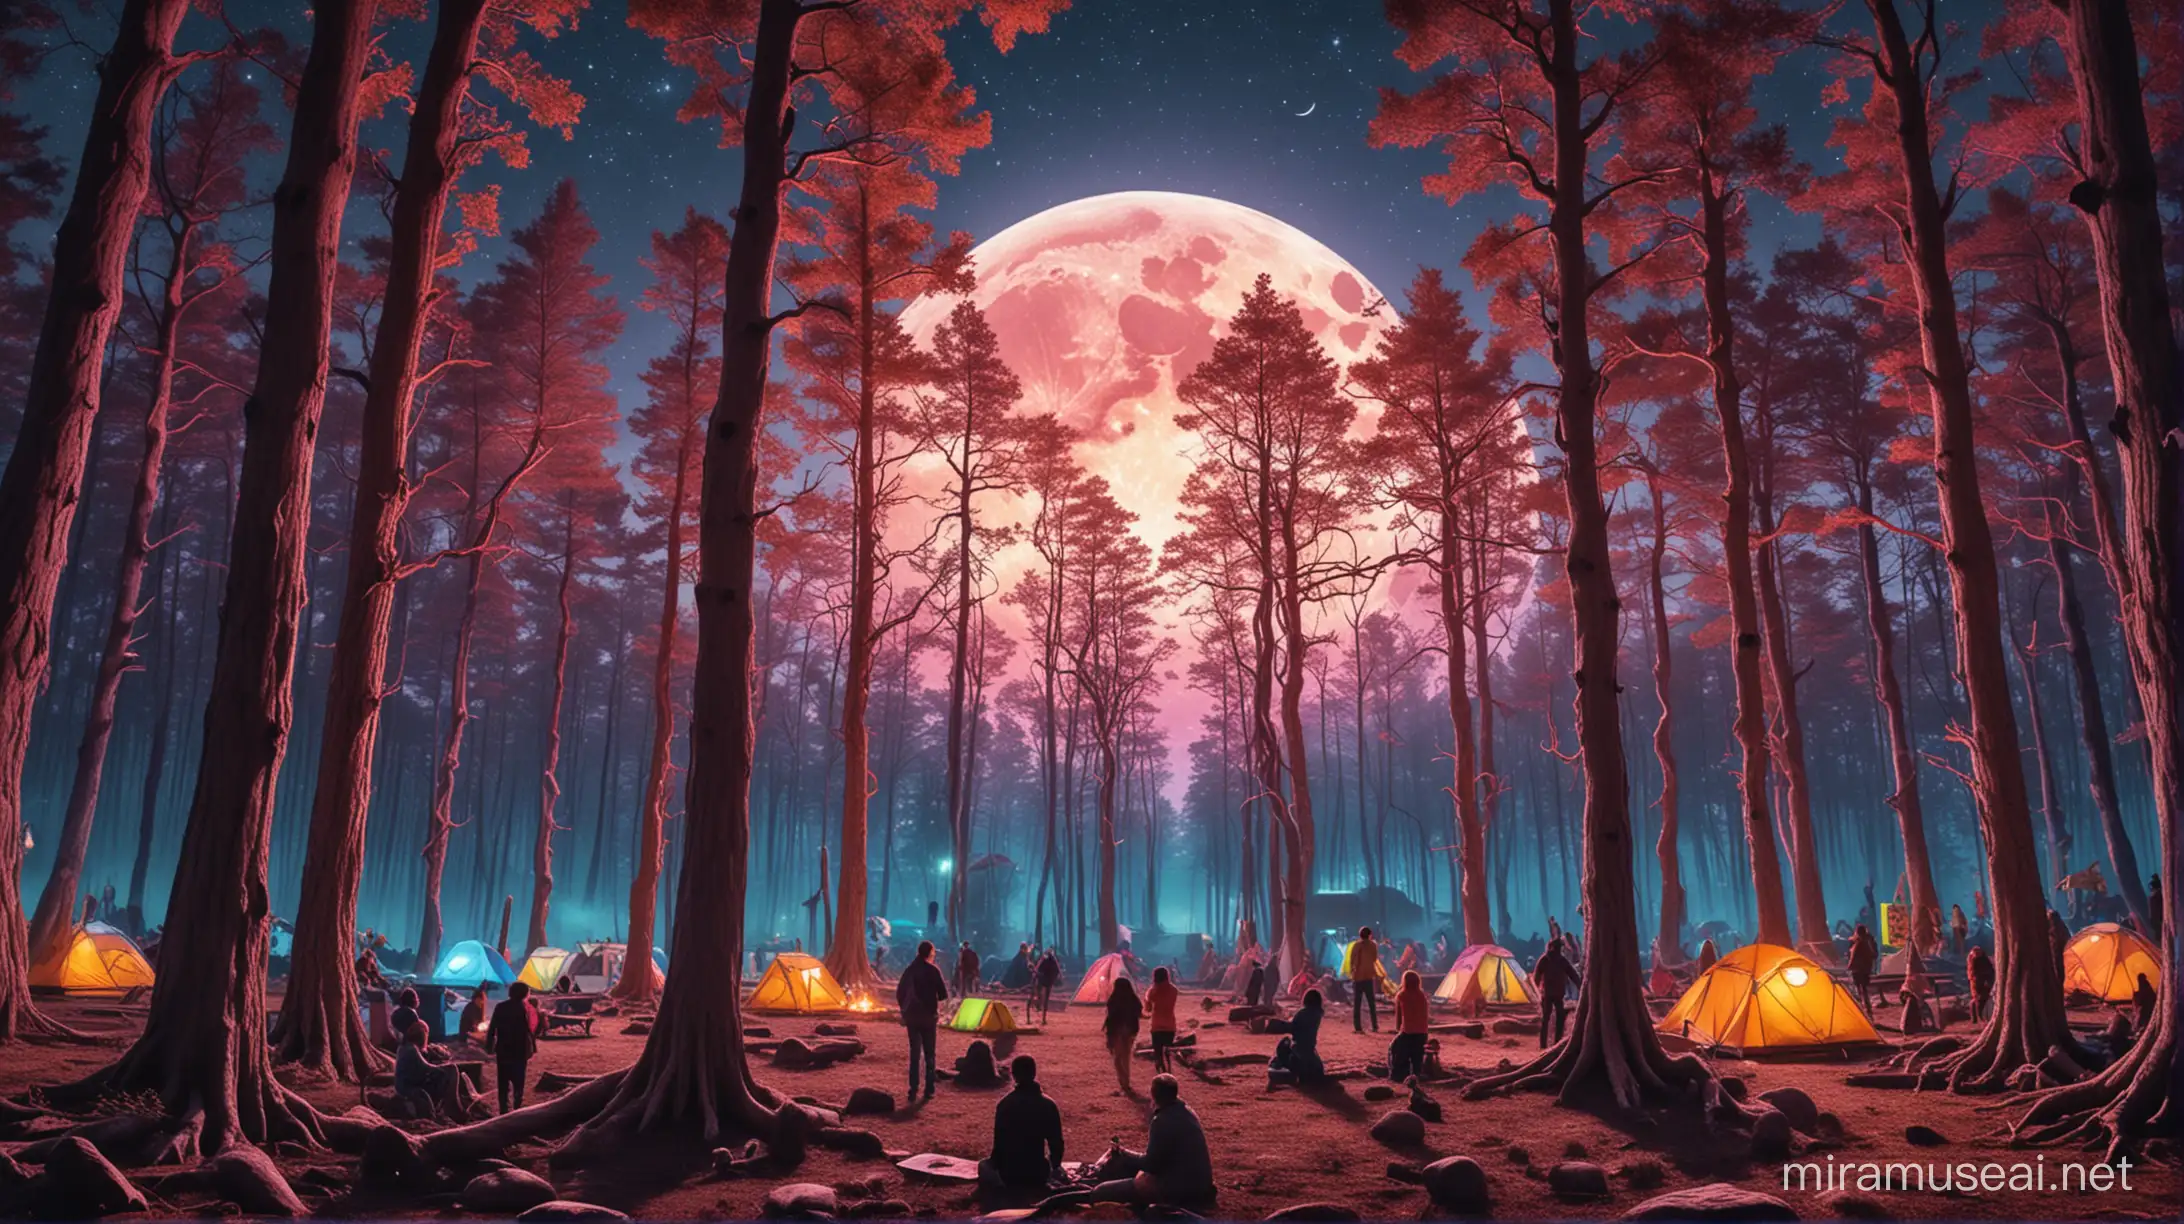 Full moon, coloured sky, forest, twisted trees, psychedelic mushrooms, dance festival, people dancing, camp fire, Strong psychedelic colours, PA speakers, stage, small strange animals, 